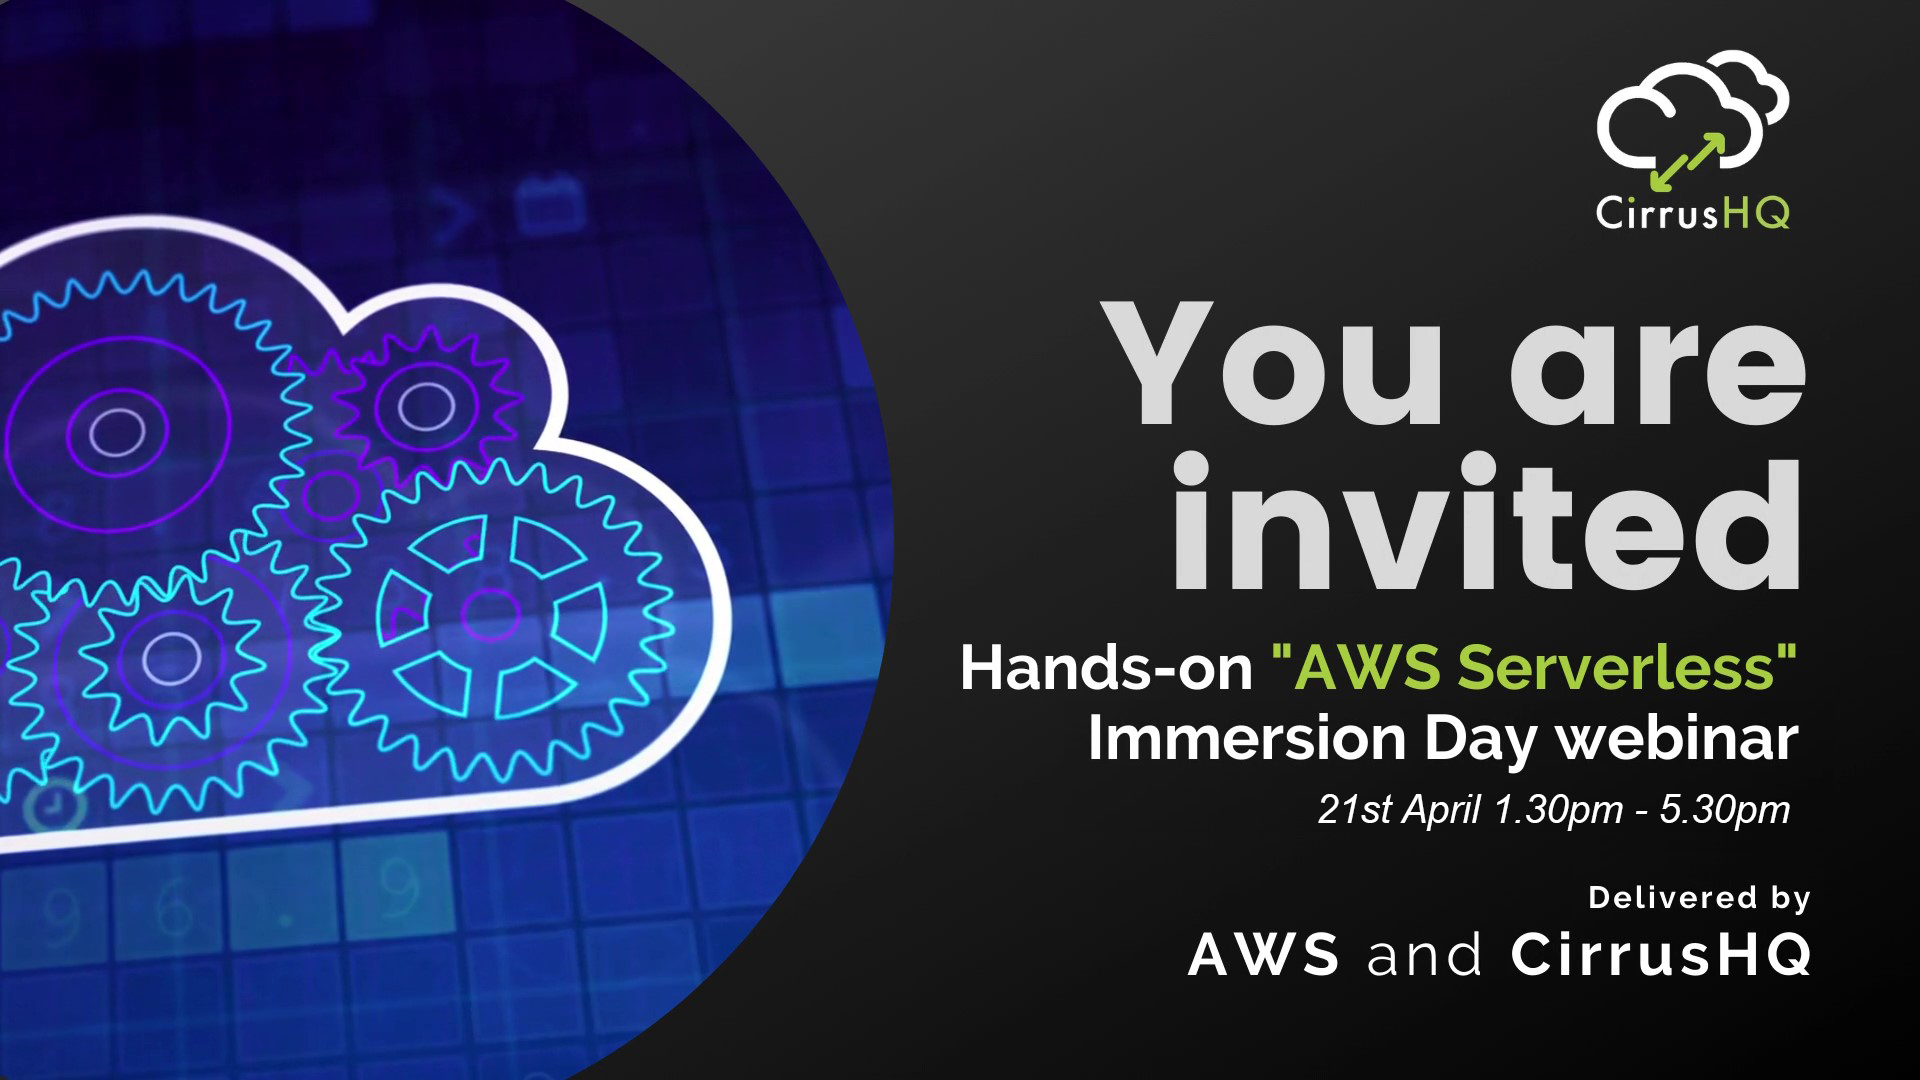 AWS "AWS Serverless Immersion Day" webinar delivered by AWS & CirrusHQ